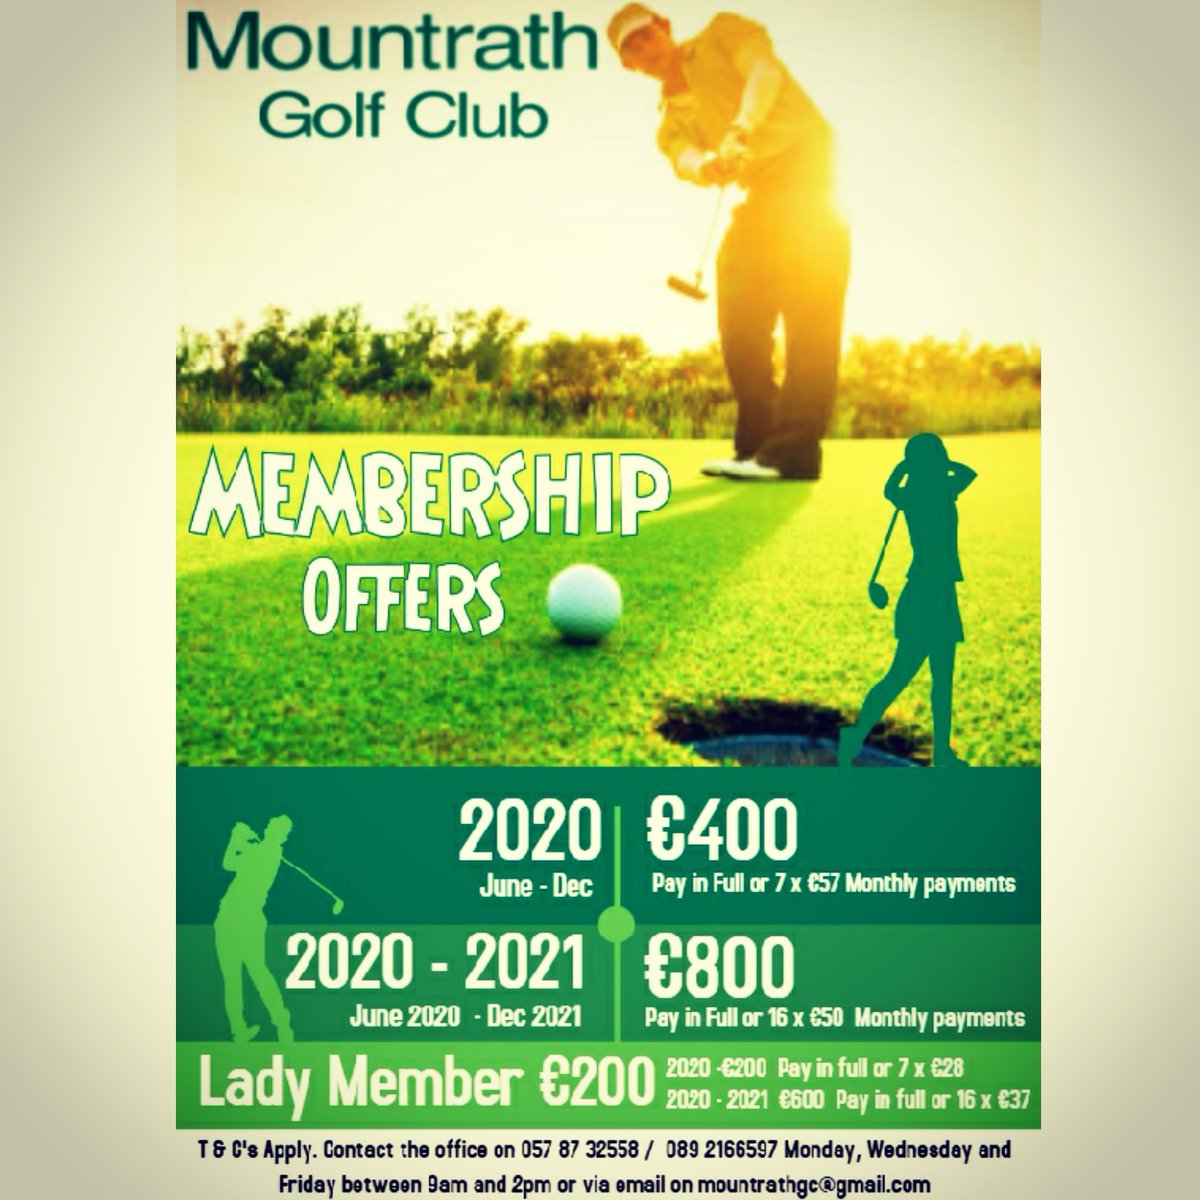 Come for the golf and stay for the friendly atmosphere. Everyone welcome, from beginners to experienced players... #MembershipOffer #LaoisGolf #IrishGolf #GolfIreland #golfisback